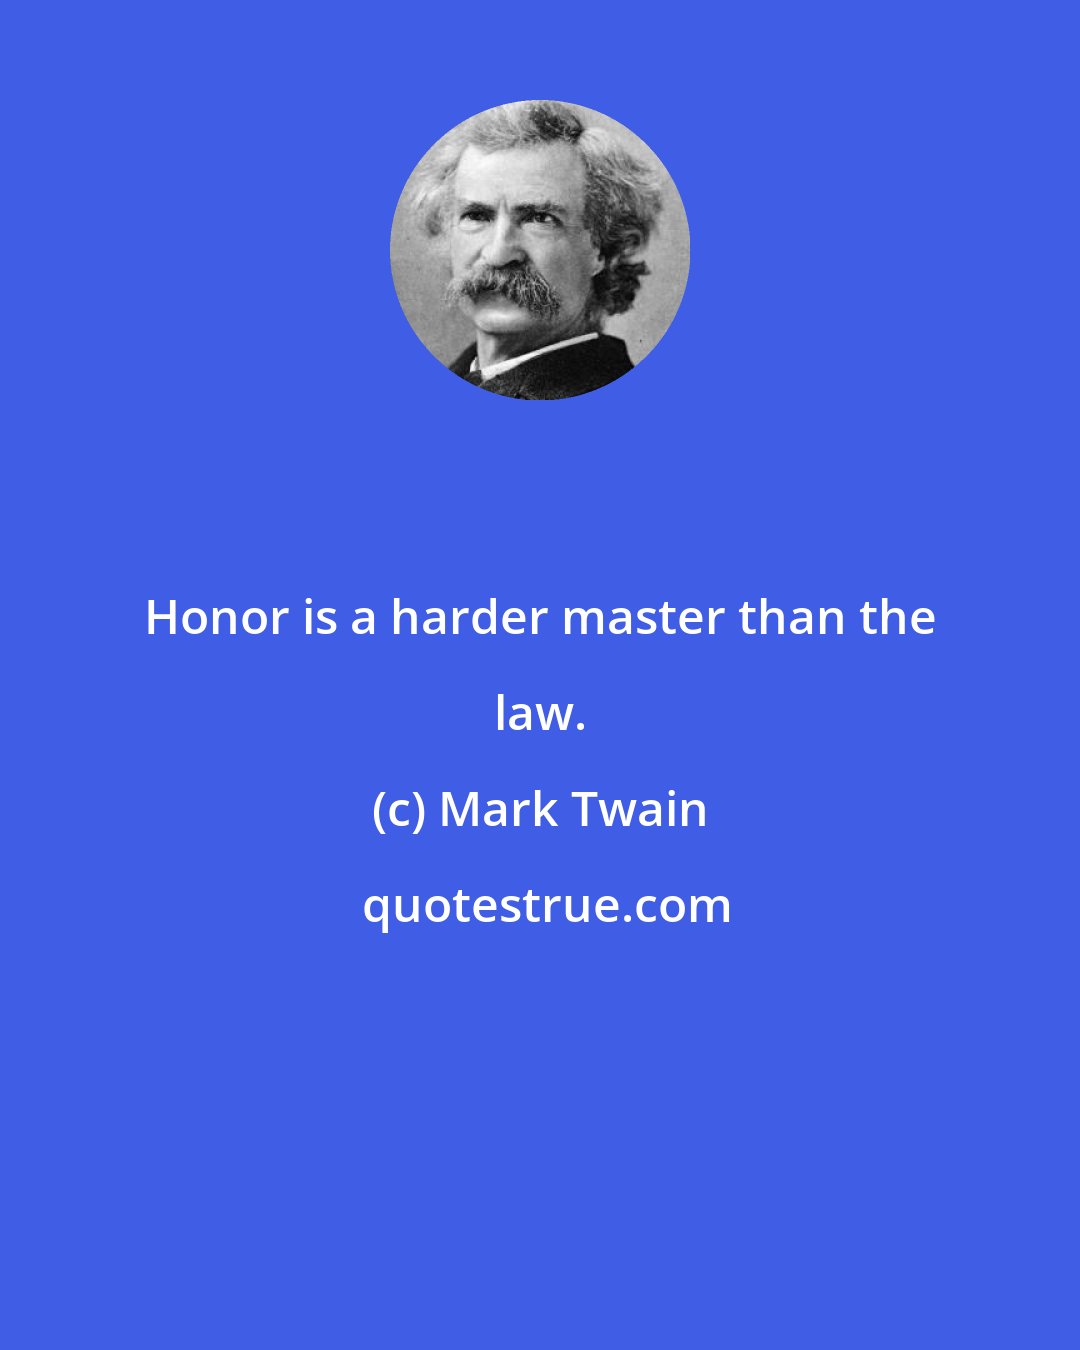 Mark Twain: Honor is a harder master than the law.